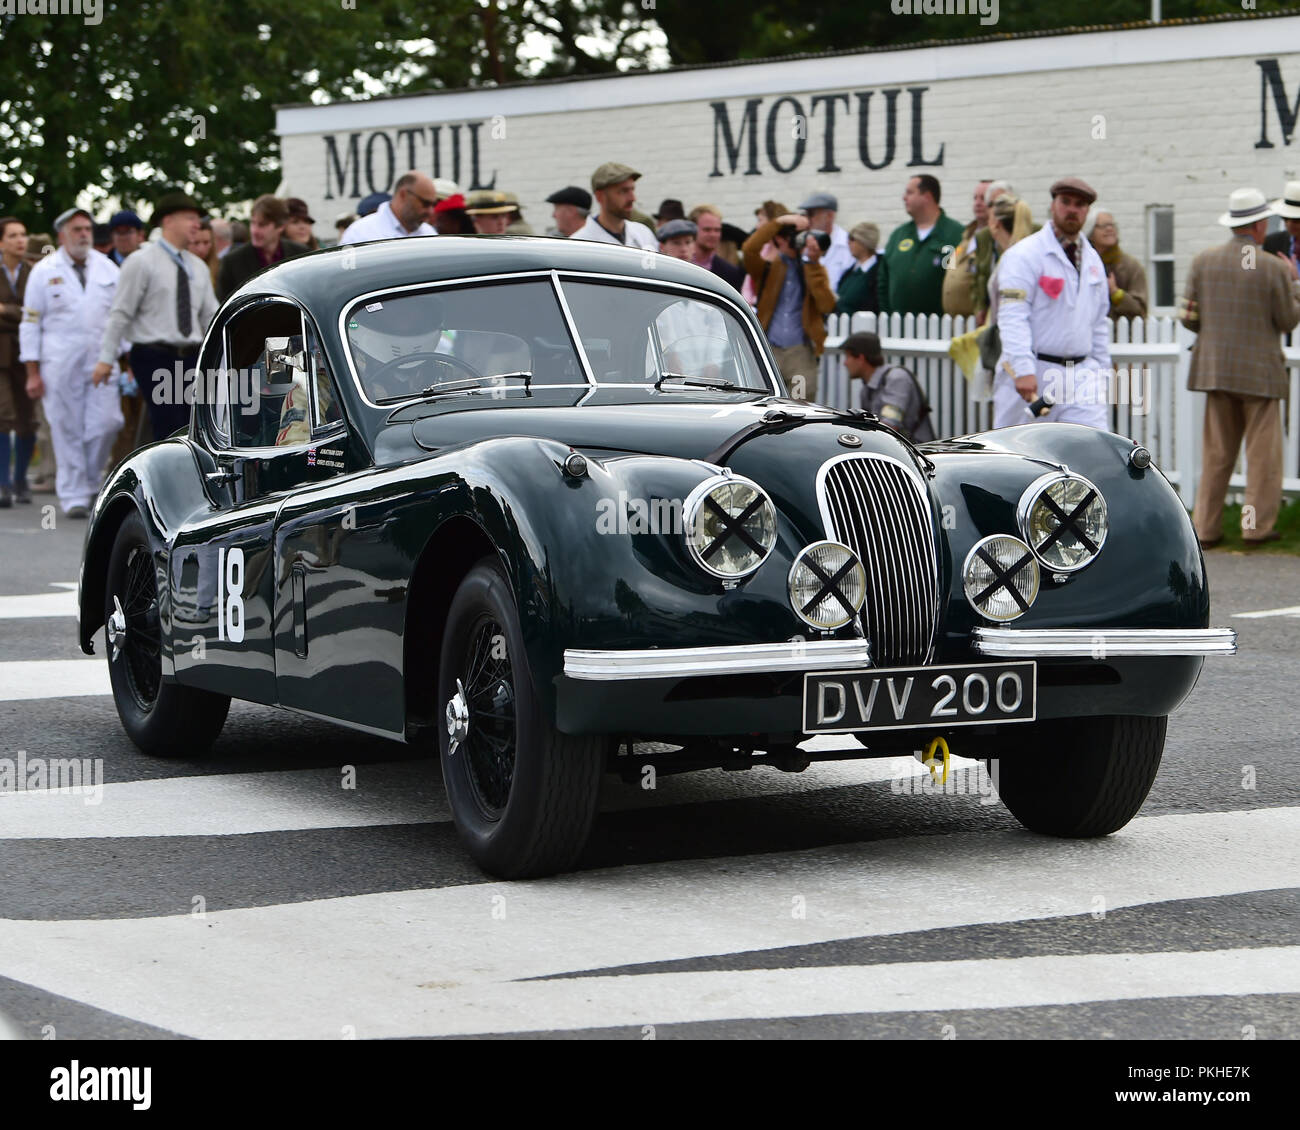 Chris Keith-Lucas, Jaguar XK120 FHC, Fordwater Trophy, Road going sports and GT cars, pre-1955, Goodwood Revival 2018, September 2018, automobiles, ca Stock Photo